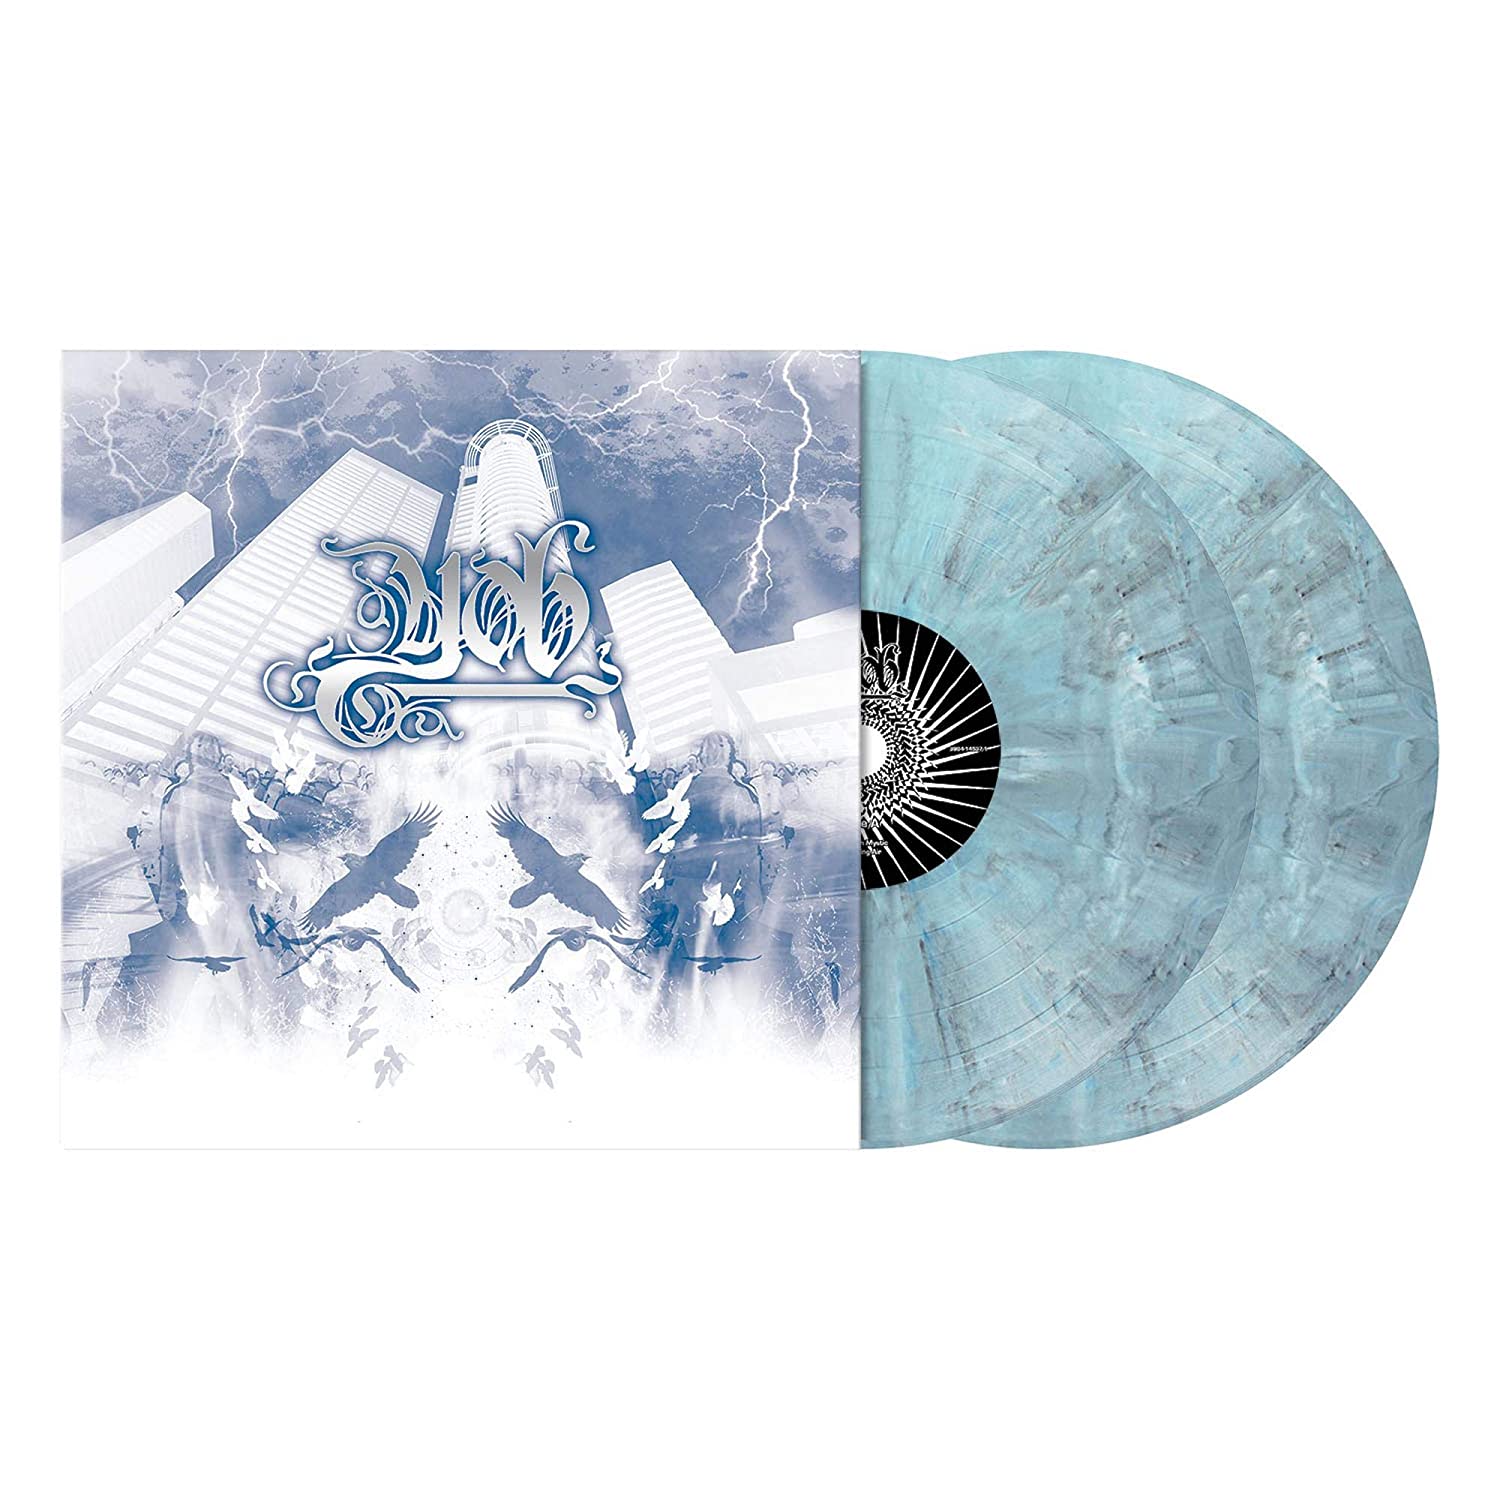 Yob - Unreal Never Lived [Colored Vinyl]